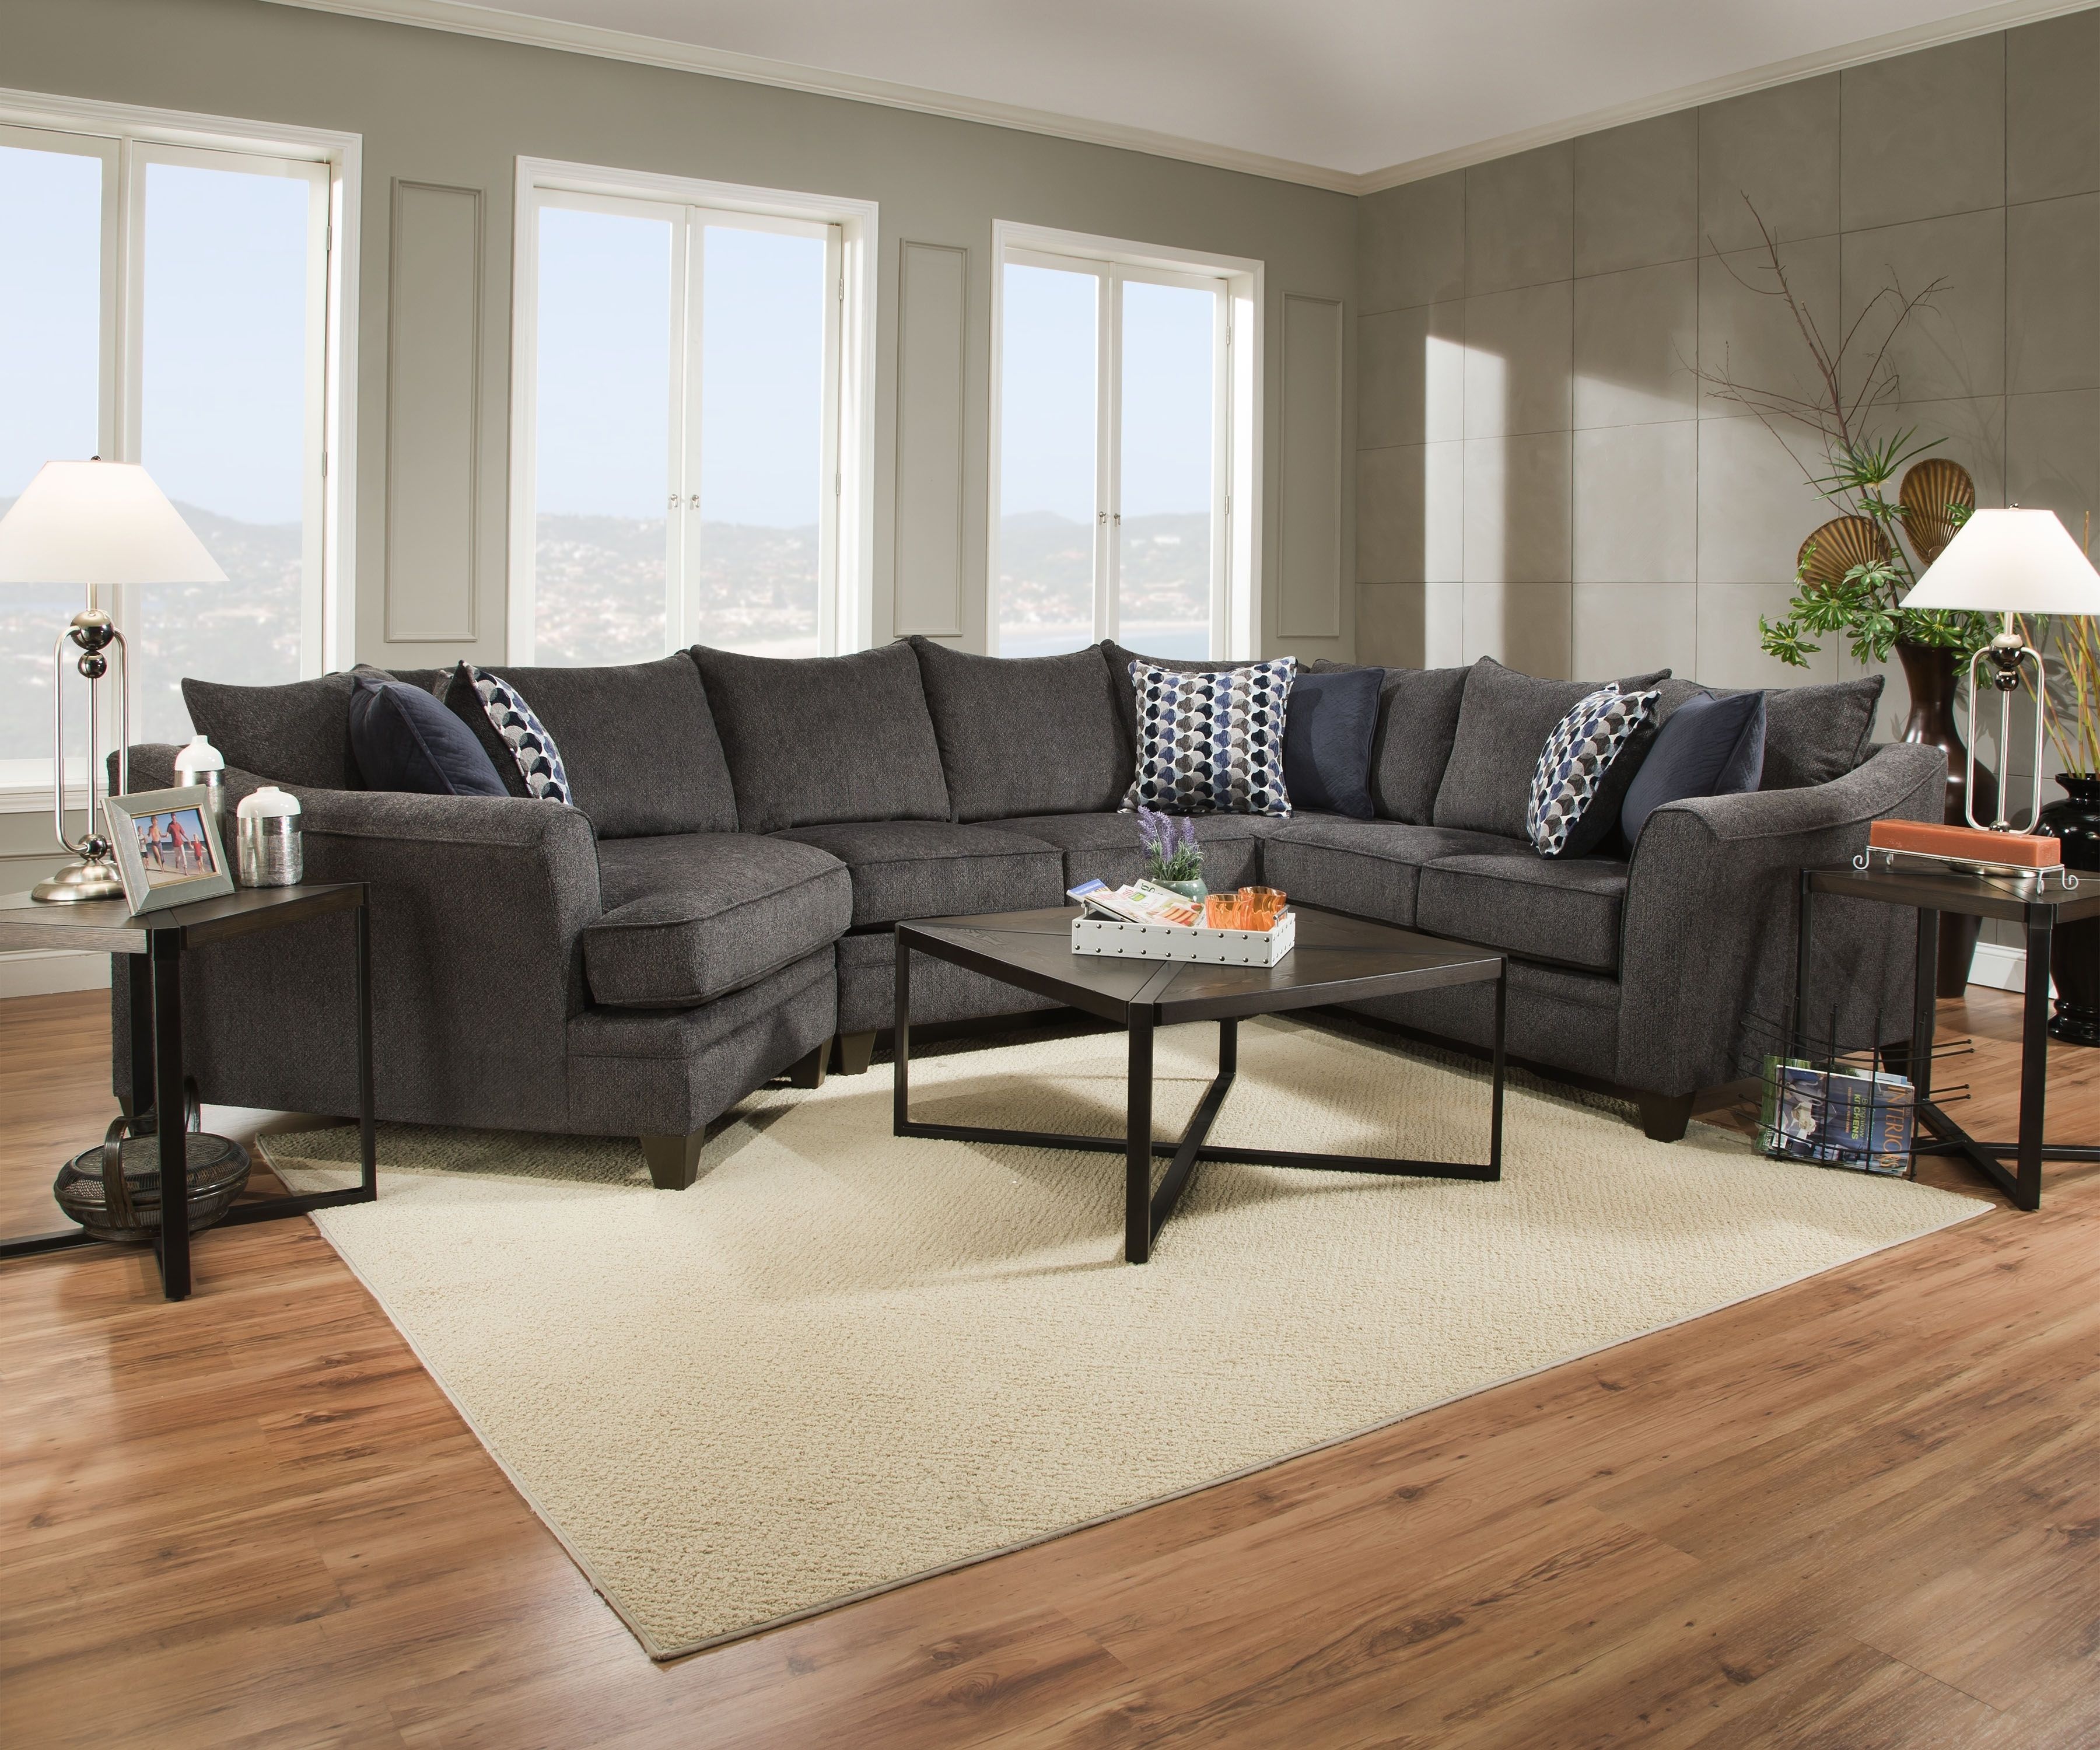 sears living room sectional furniture